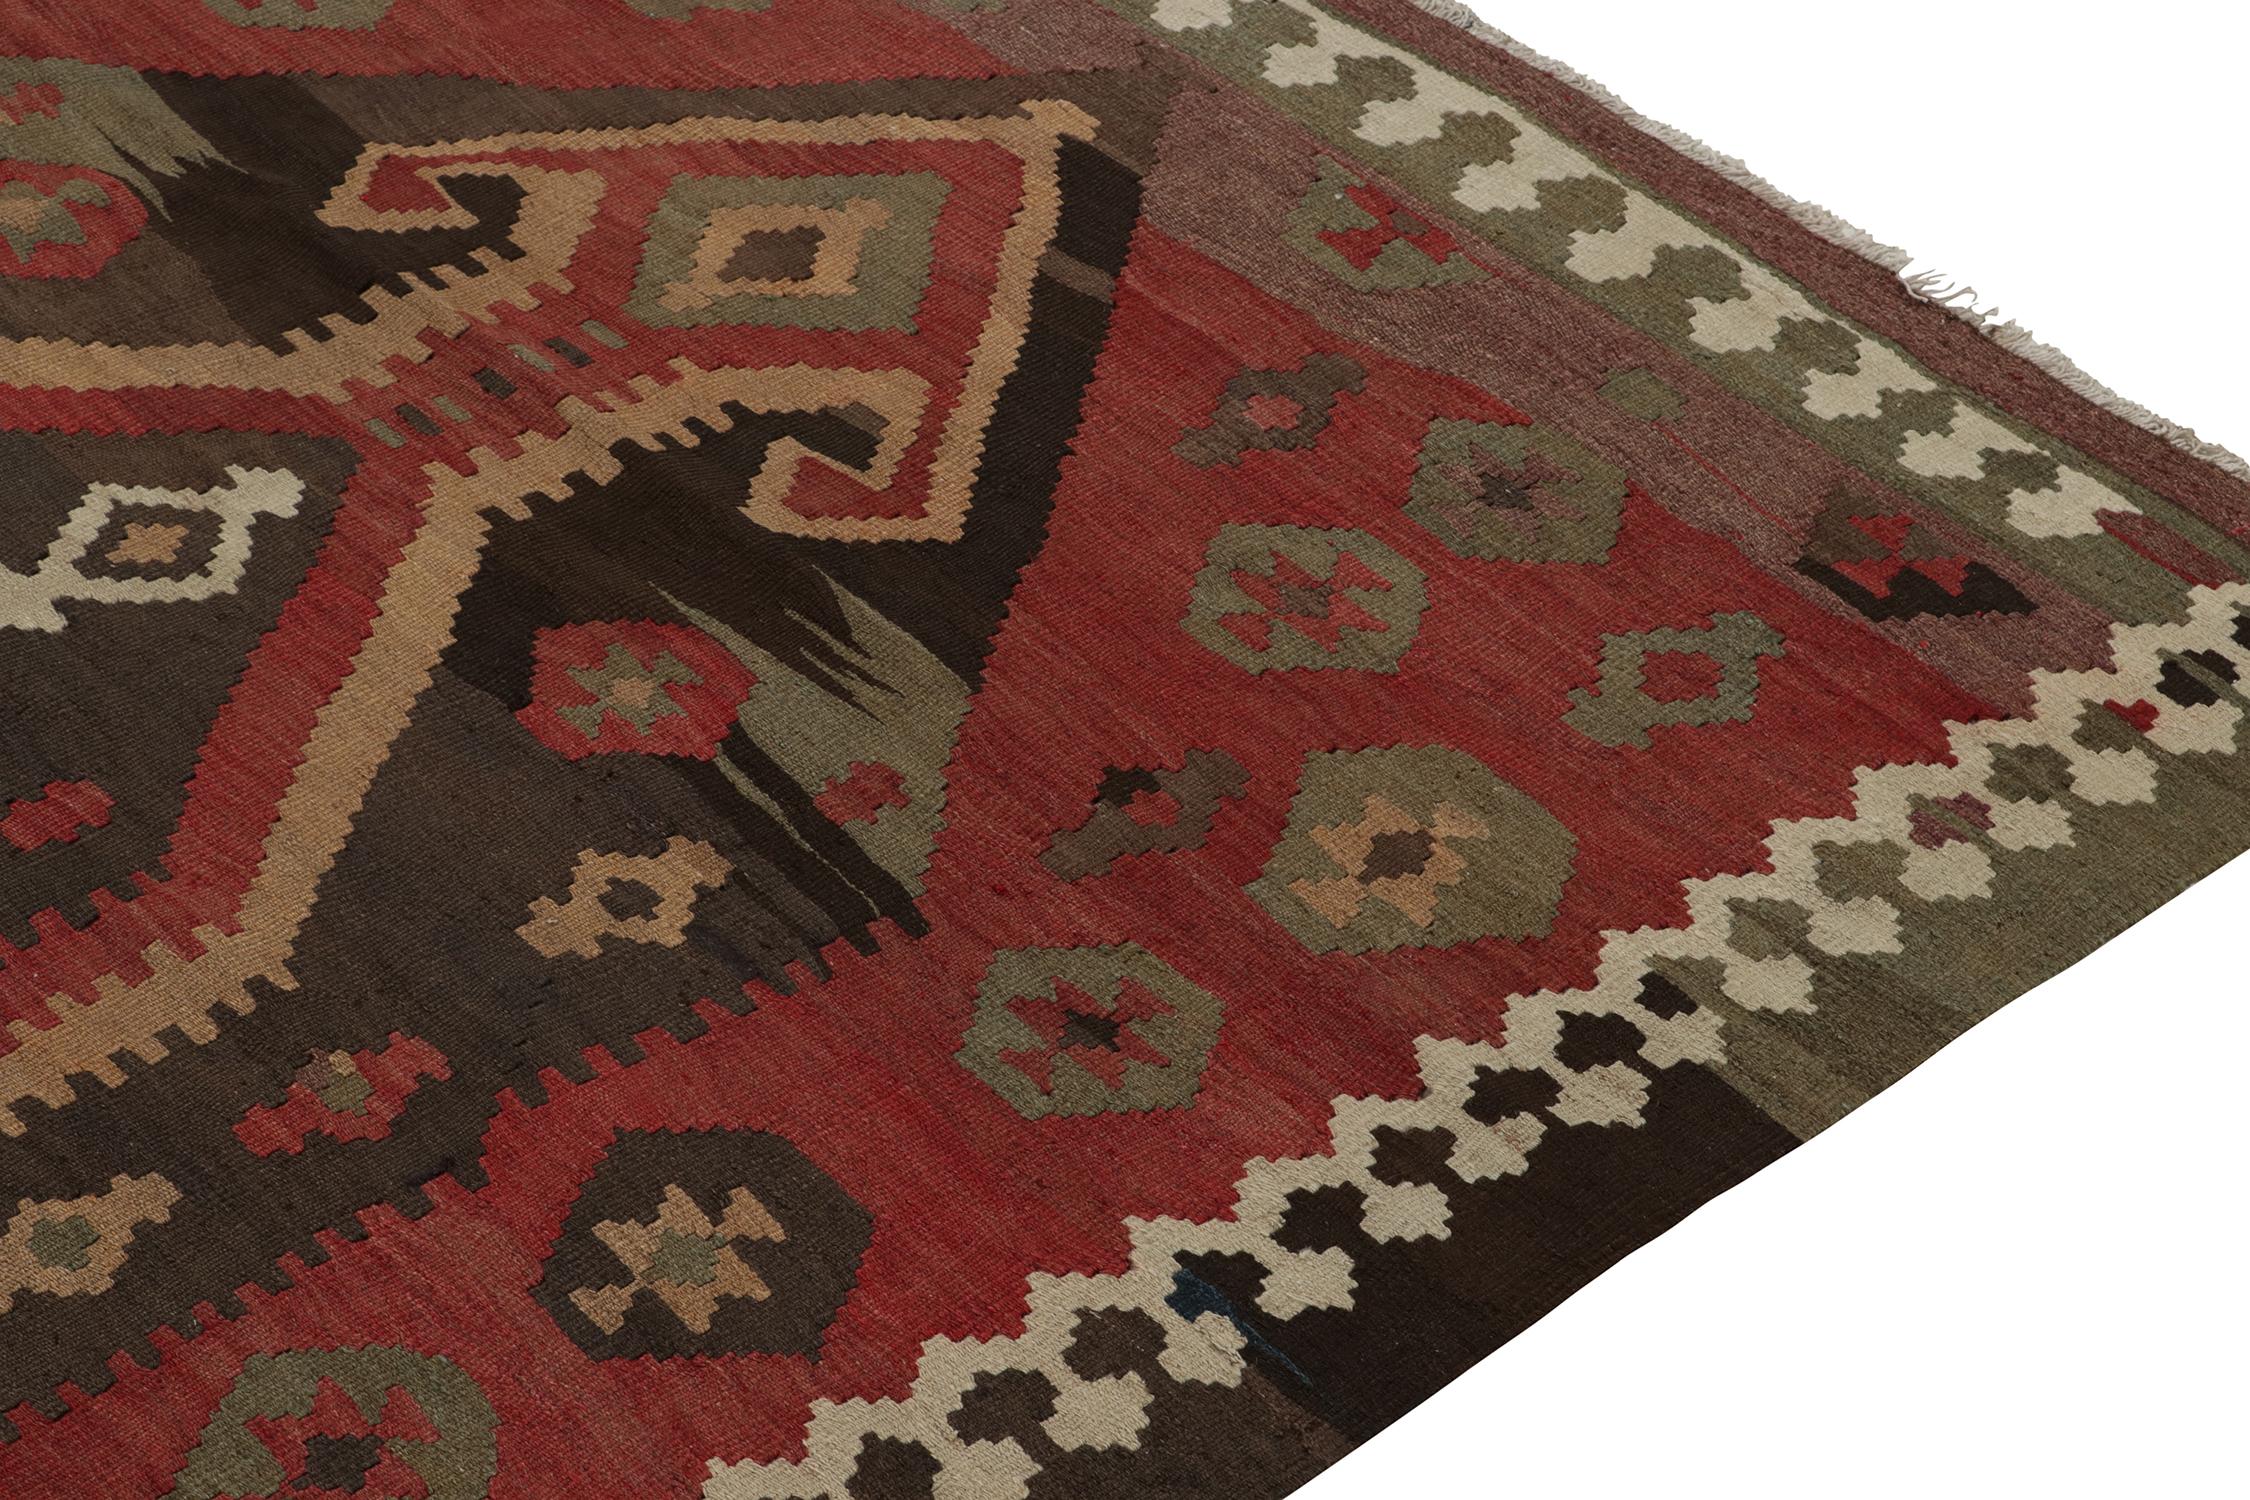 Vintage Shahsavan Persian Kilim in Red and Brown Patterns by Rug & Kilim In Good Condition For Sale In Long Island City, NY